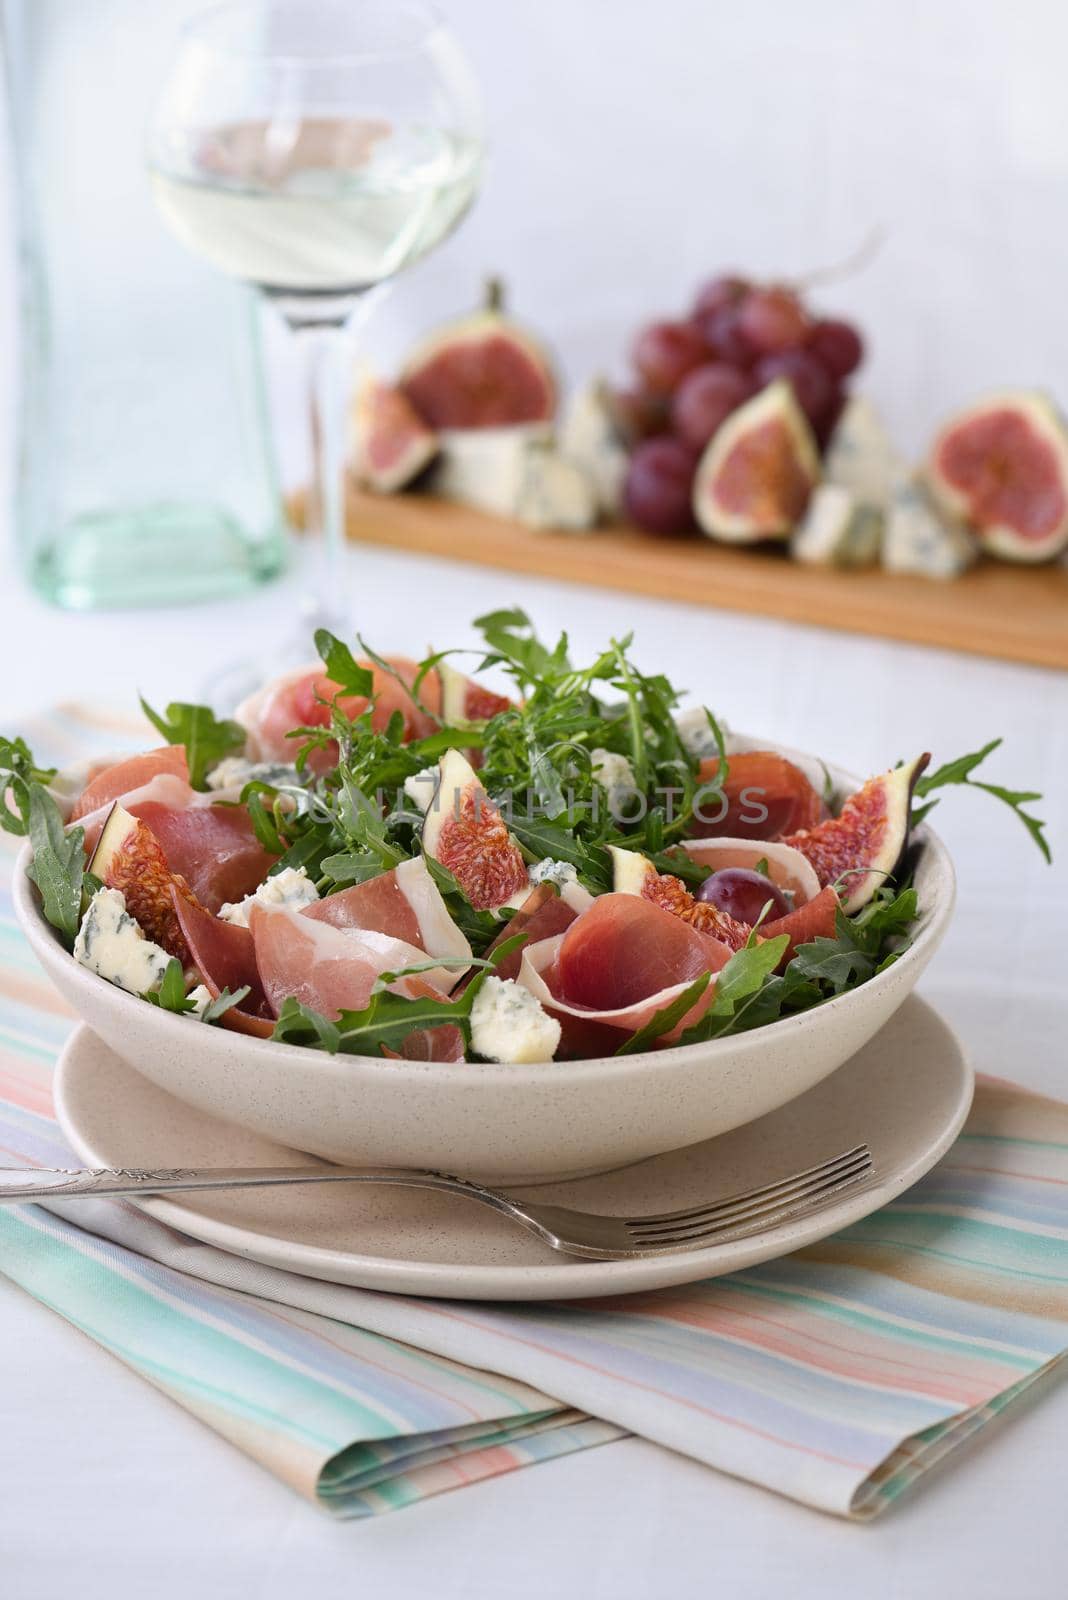 Salad with cheese, arugula with ham by Apolonia